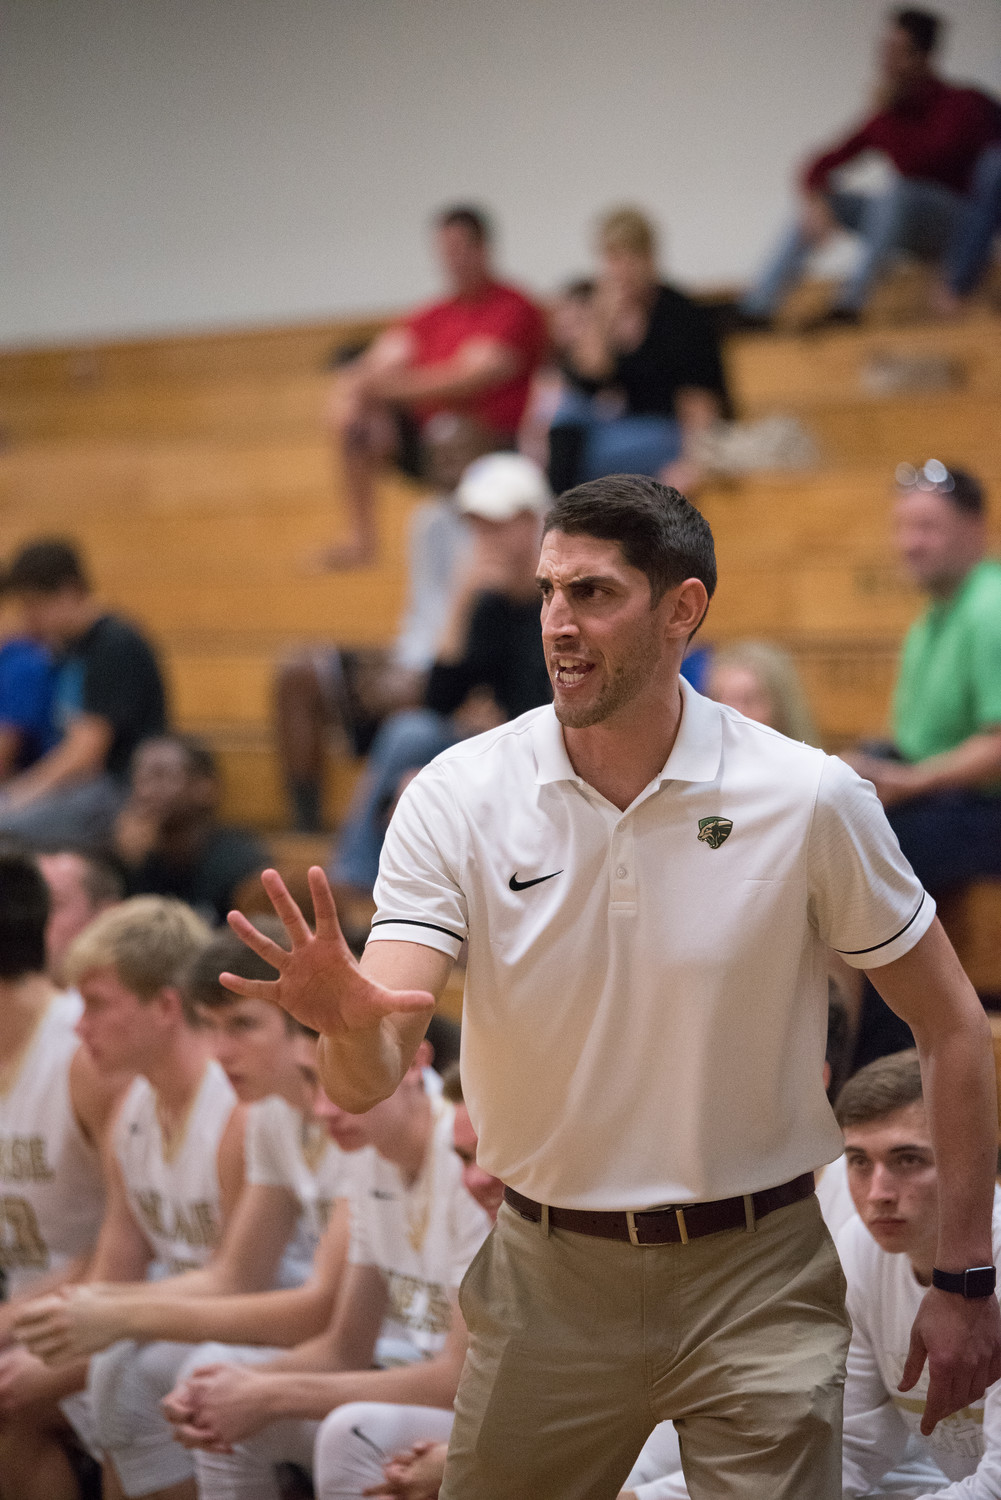 Nease coach Joshua Bailen yells to his team during the win against Middleburg. The Panthers (2-3, 1-1) trailed Middleburg 24-17 at the half, but held the Broncos to just four points in the third quarter. Nease fell to Englewood 56-37 in a district game on Dec. 7, and won/loss XX-XX to White on Dec. 12. The Panthers next play at rival Ponte Vedra at 7:30 p.m. on Friday, Dec. 15.